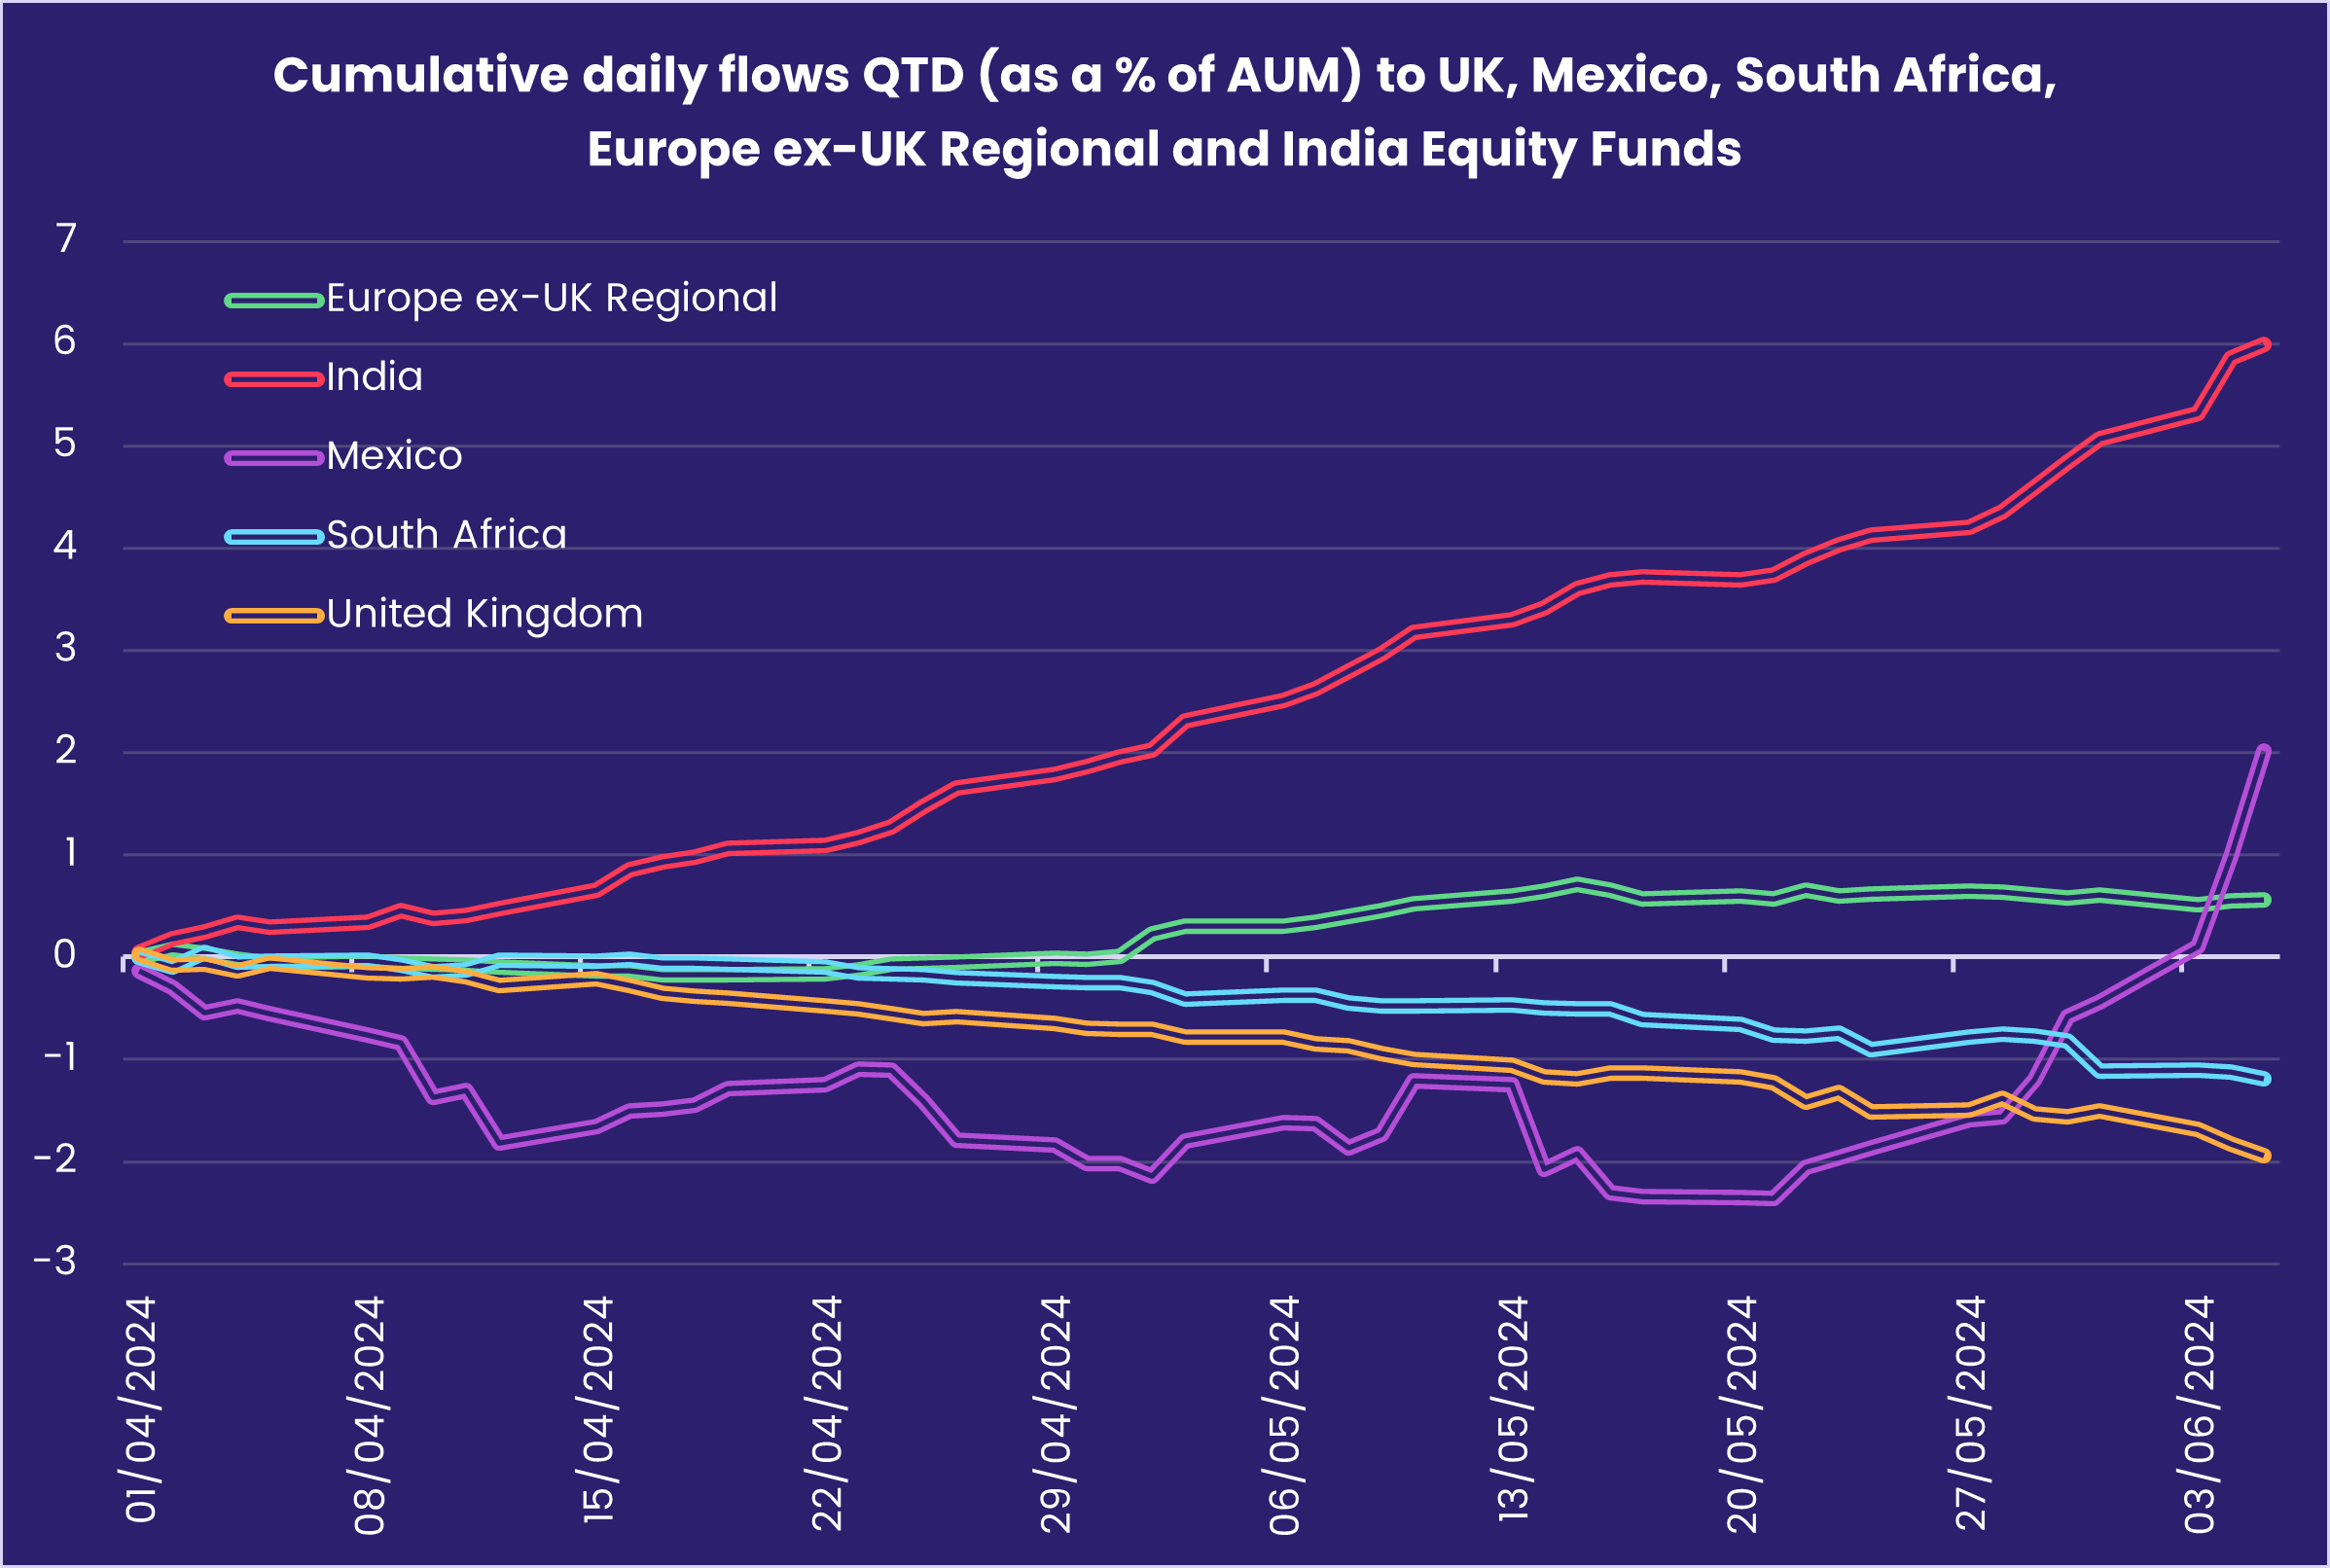 Chart representing 'Cumulative daily flows QTD (as a % of AUM) to UK, Mexico, South Afrida, Europe, ex-UK Regional and India Equity Funds'